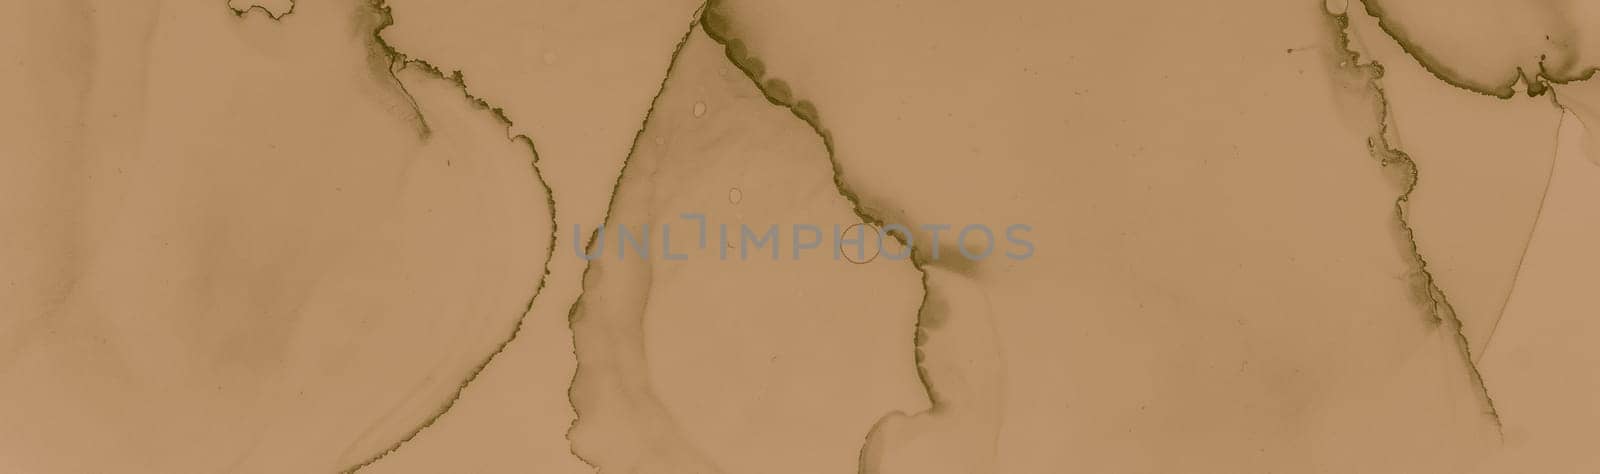 Beige Coffee Paint. Grunge Brown Texture. Aged Old Dirt Paper. Watercolour Chocolate Template. Beige Coffee Splash. Grunge Blots Texture. Creative Old Dirt Paper. Abstract Coffee Stains.